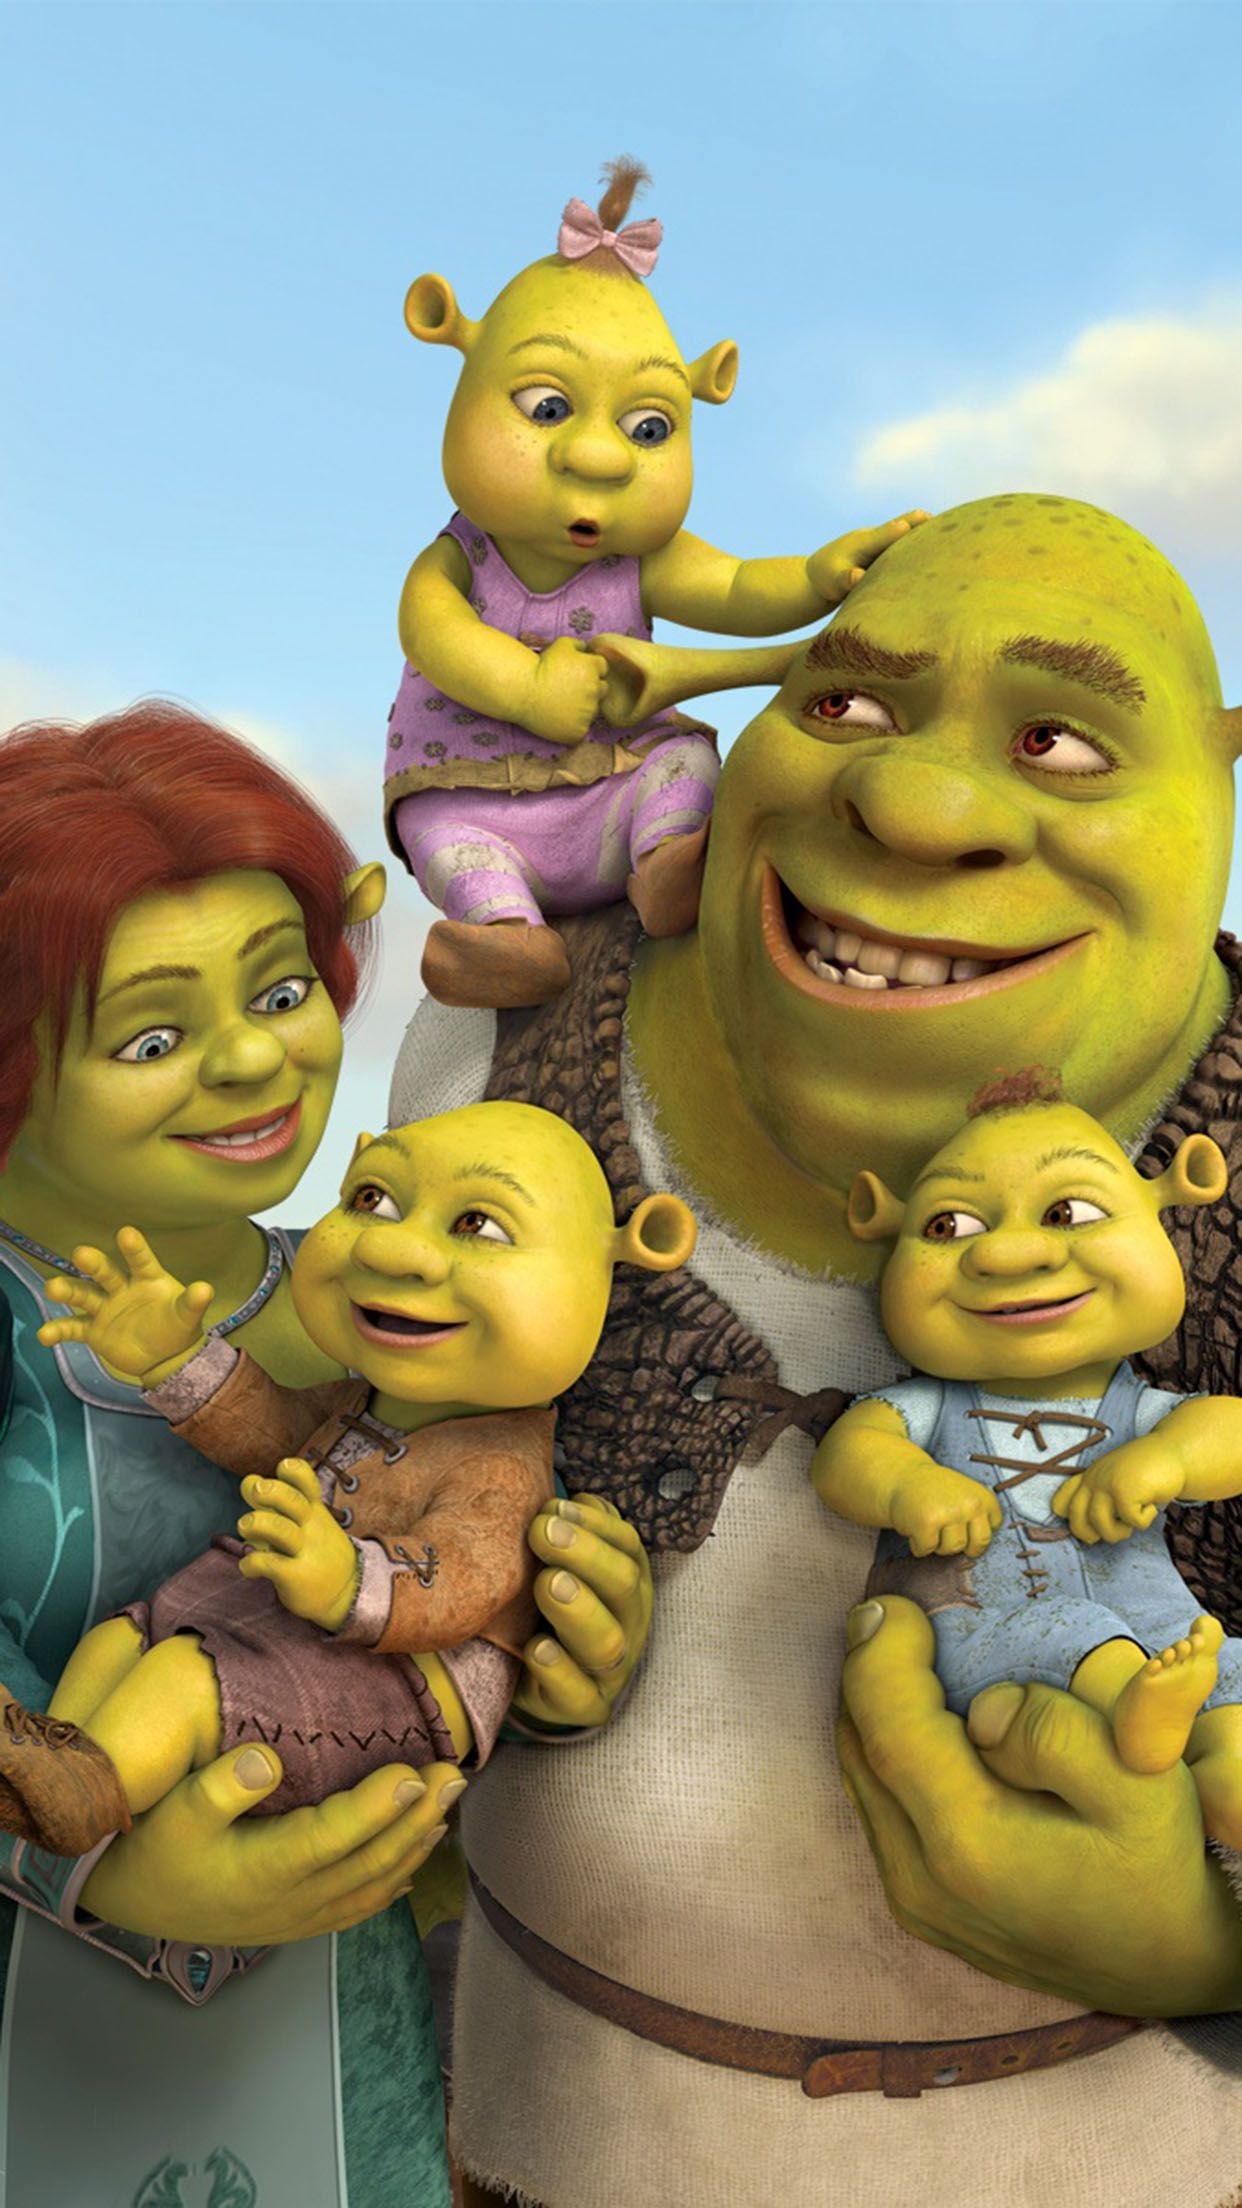 Shrek and Fiona's babies Wallpaper for iPhone Pro Max, X, 7